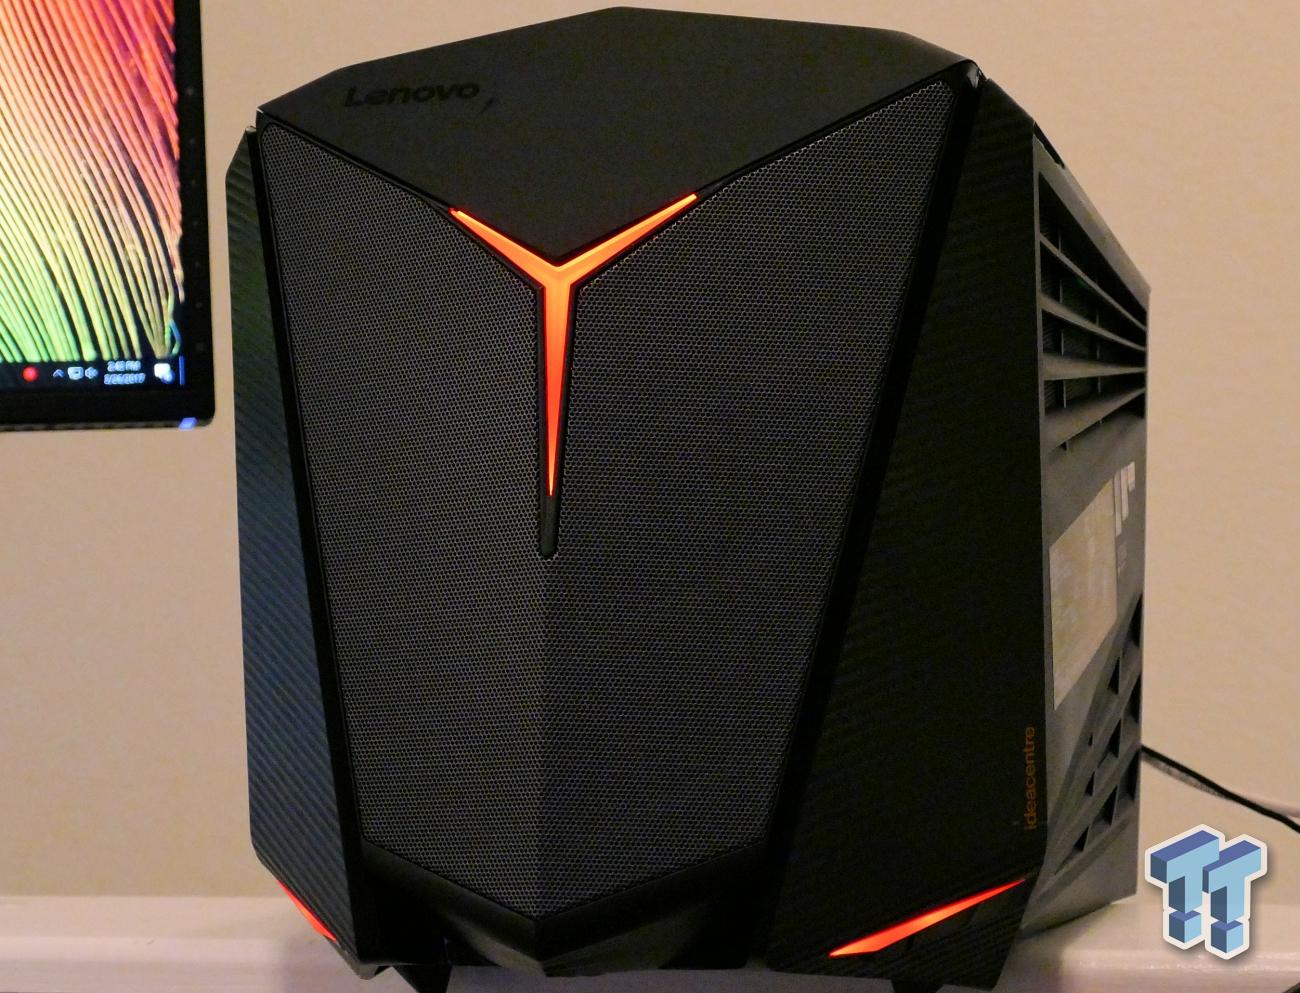 Lenovo IdeaCentre Y710 Cube Gaming PC Review